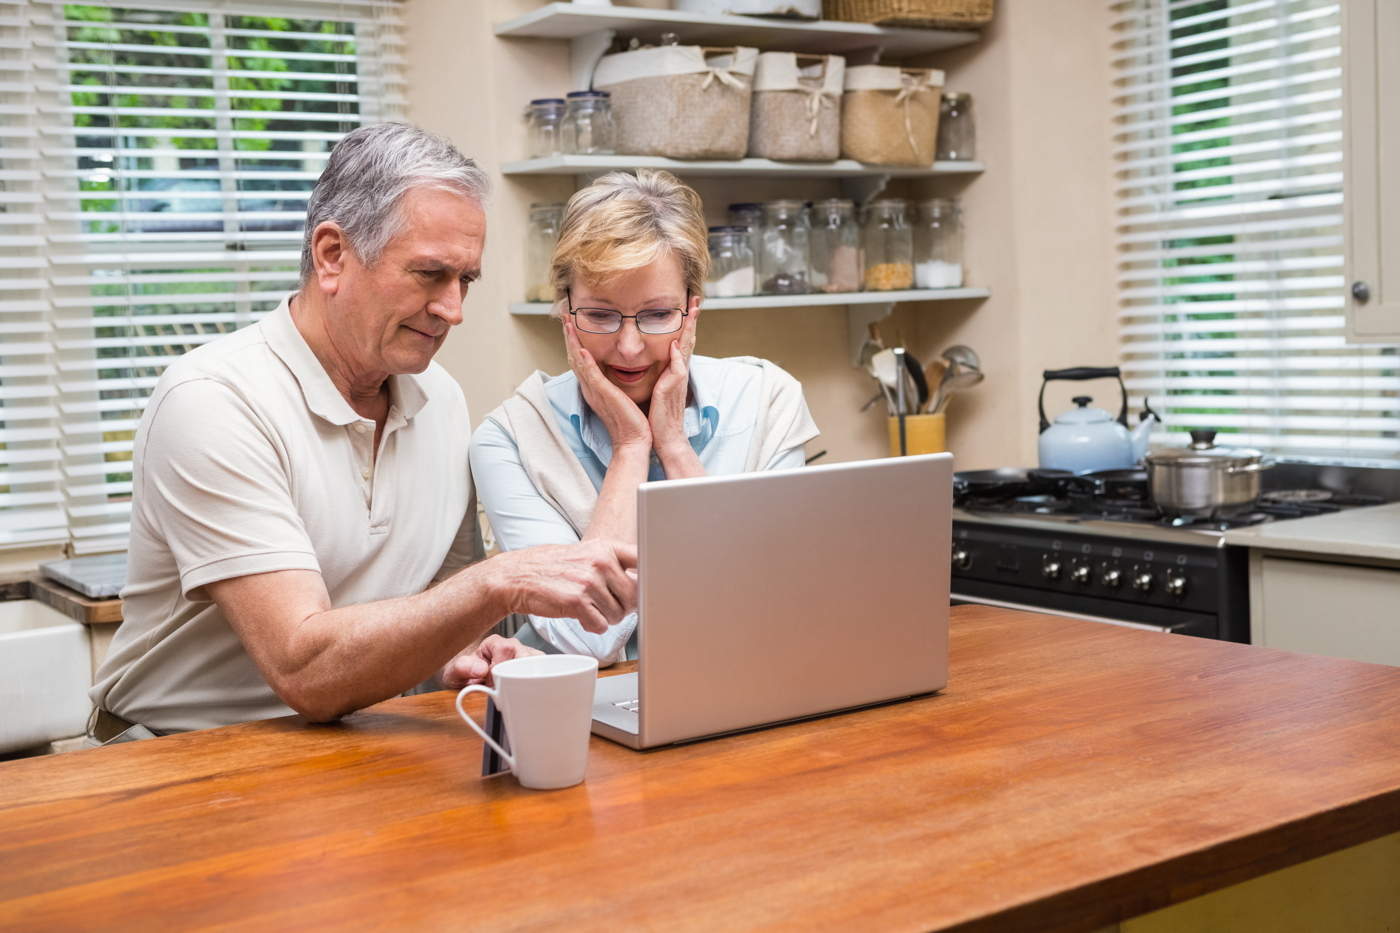 Senior couple using the laptop together at home in the kitchen